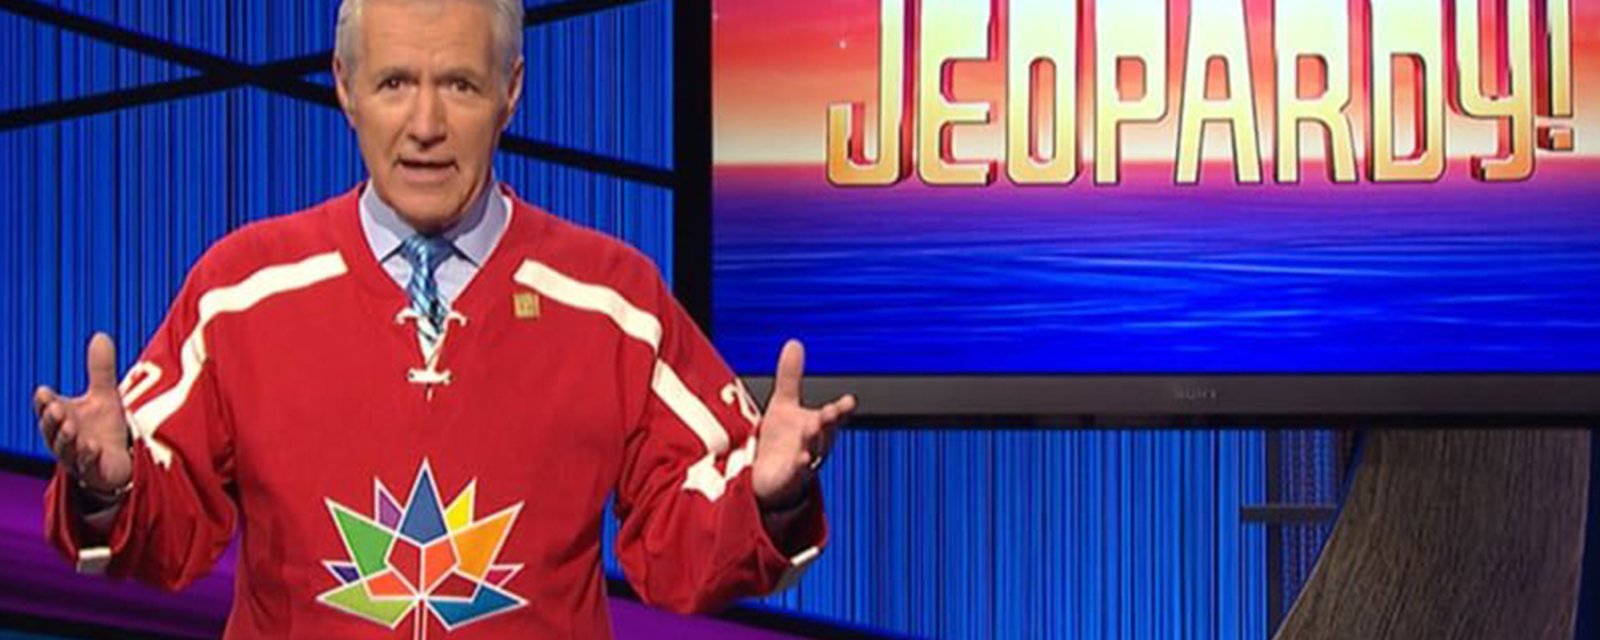 Breaking: Jeopardy host Alex Trebek will make his first public appearance since cancer diagnosis at NHL Awards